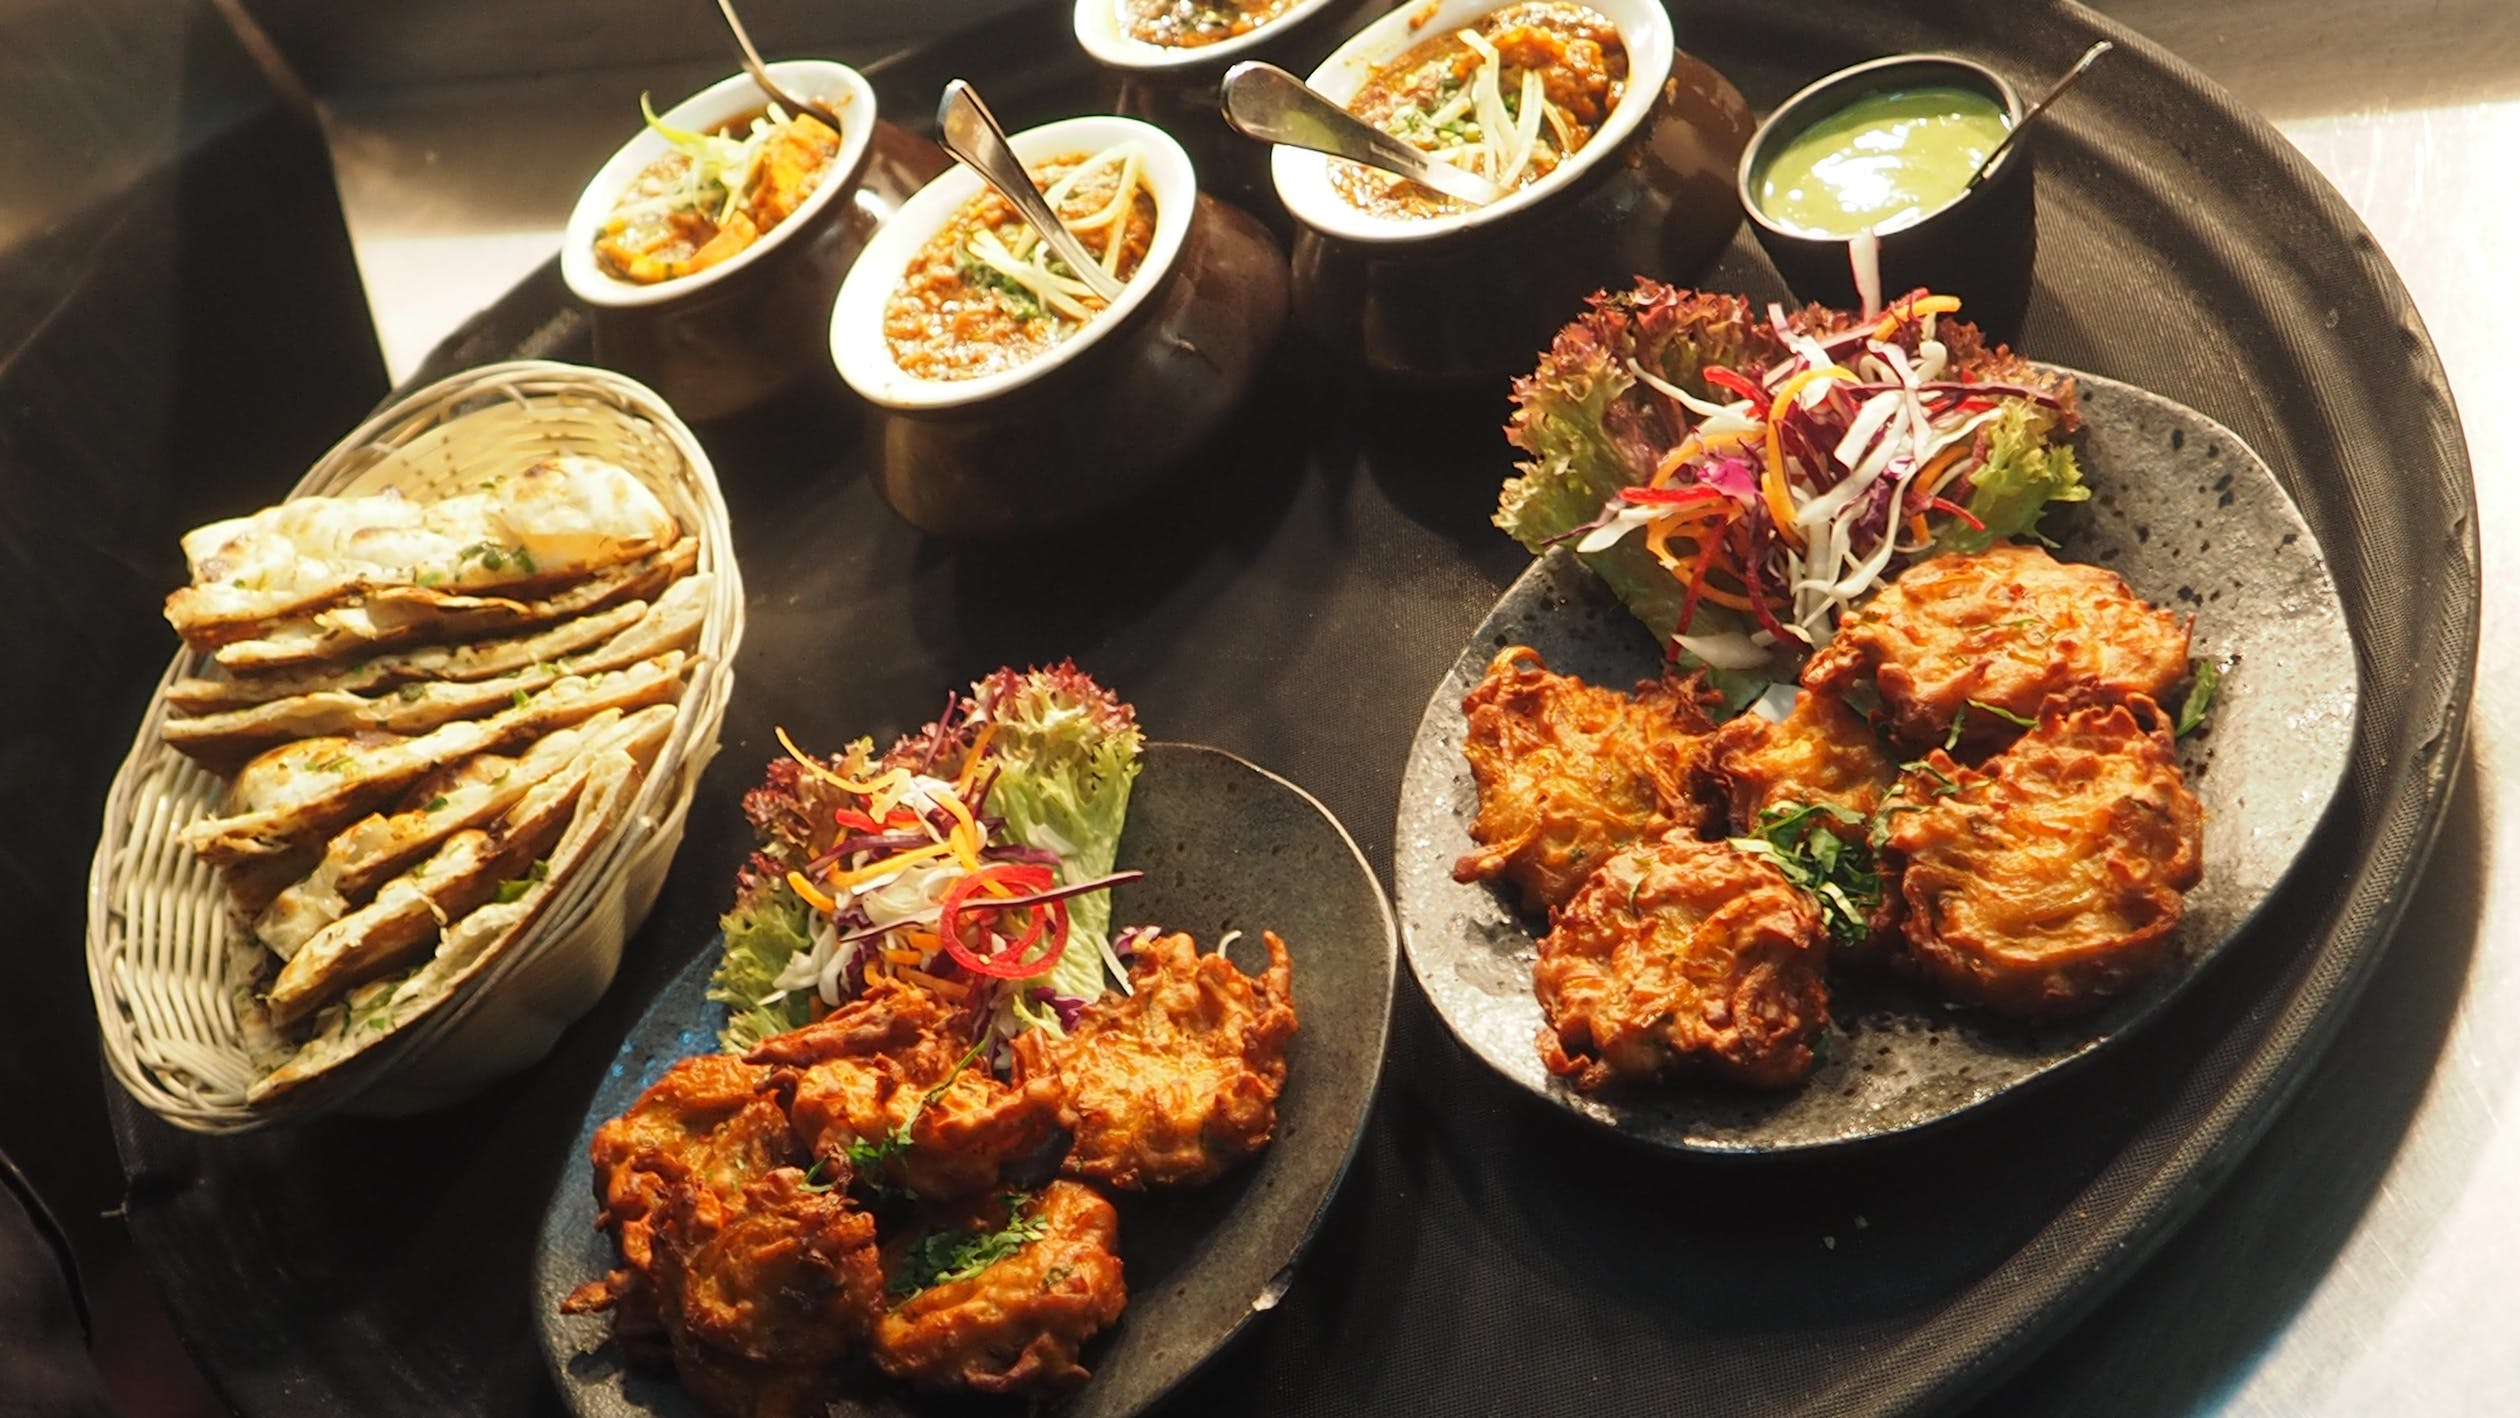 Enjoy Scrumptious Indian food at the Best Indian Restaurant in Abu Dhabi